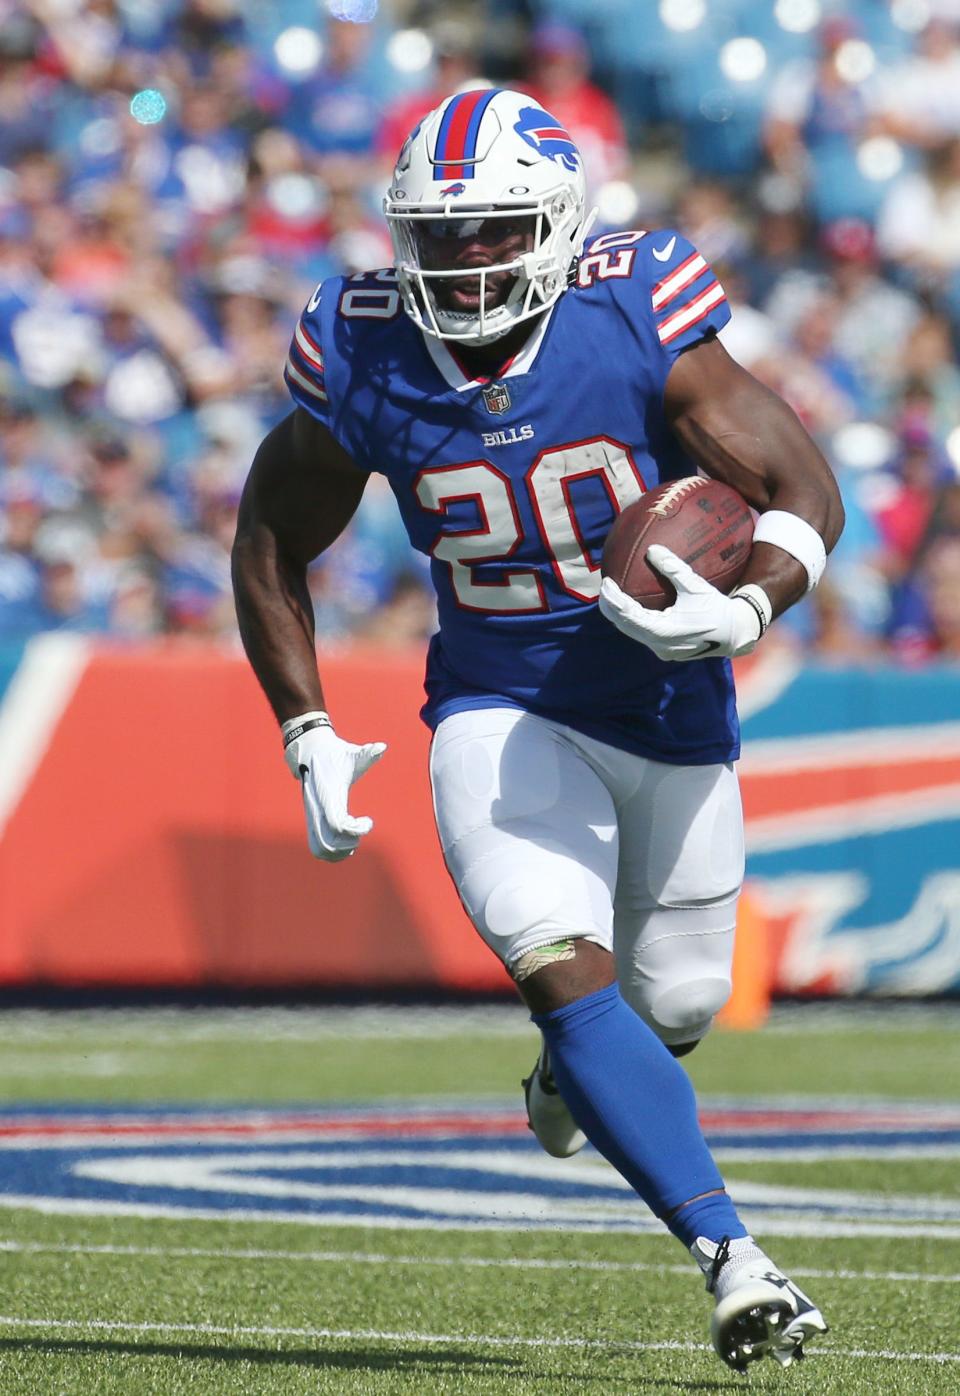 Buffalo Bills running back  Zach Moss races the ball upfield on a carry during the Bills 27-24 win over Indianapolis in their first preseason game Saturday, Aug. 13, 2022 at Highmark Stadium in Orchard Park.